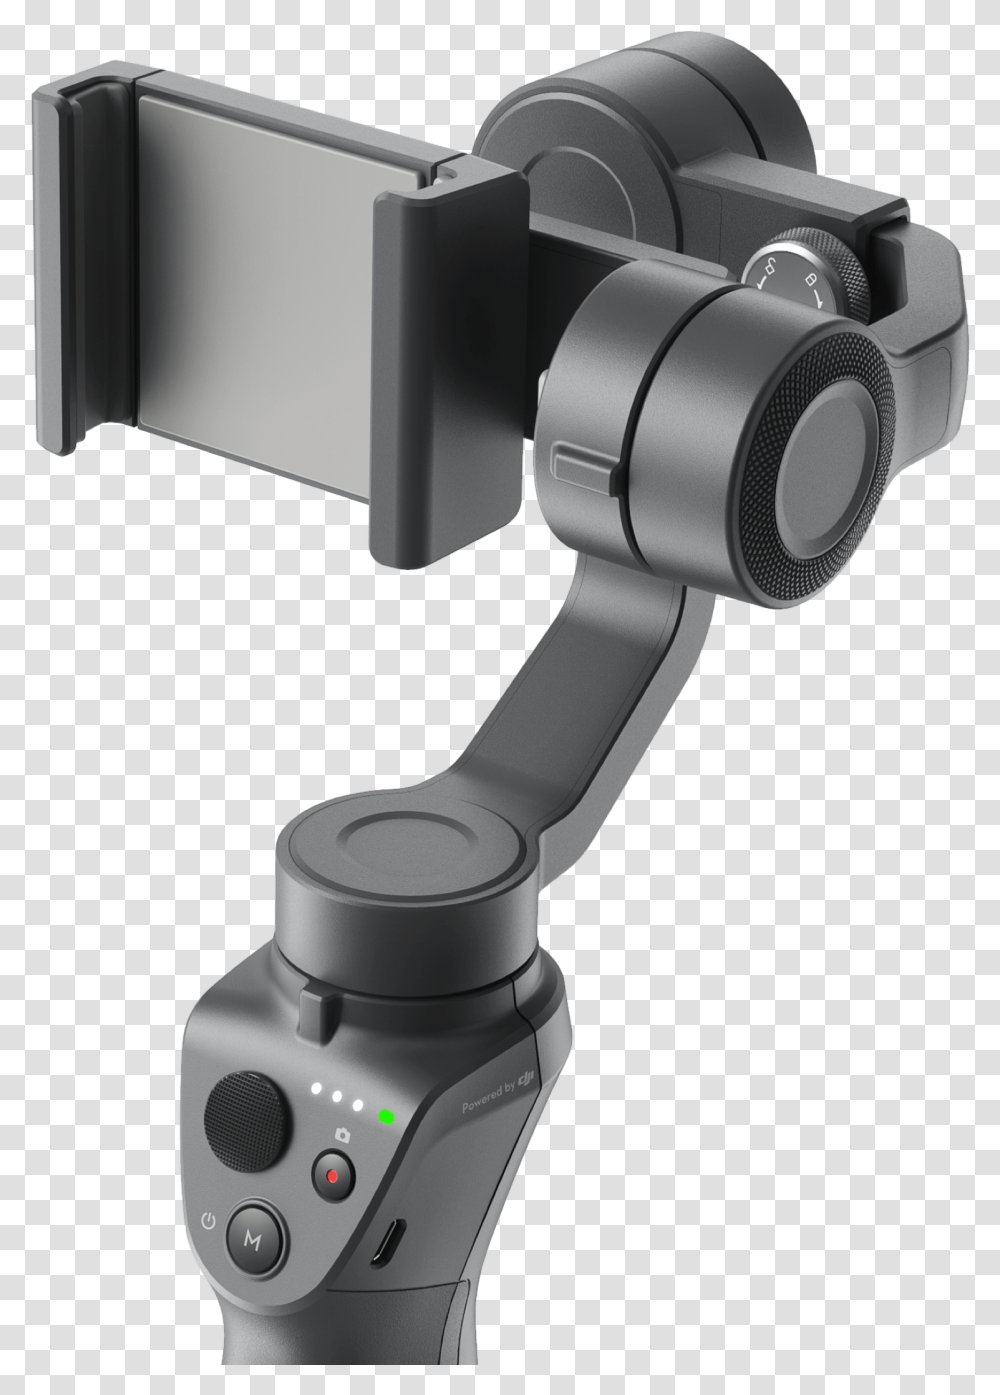 Gun Pointed At Camera Dji Announces Osmo 2 Mobile Dji Osmo Mobile, Electronics, Webcam, Blow Dryer, Appliance Transparent Png